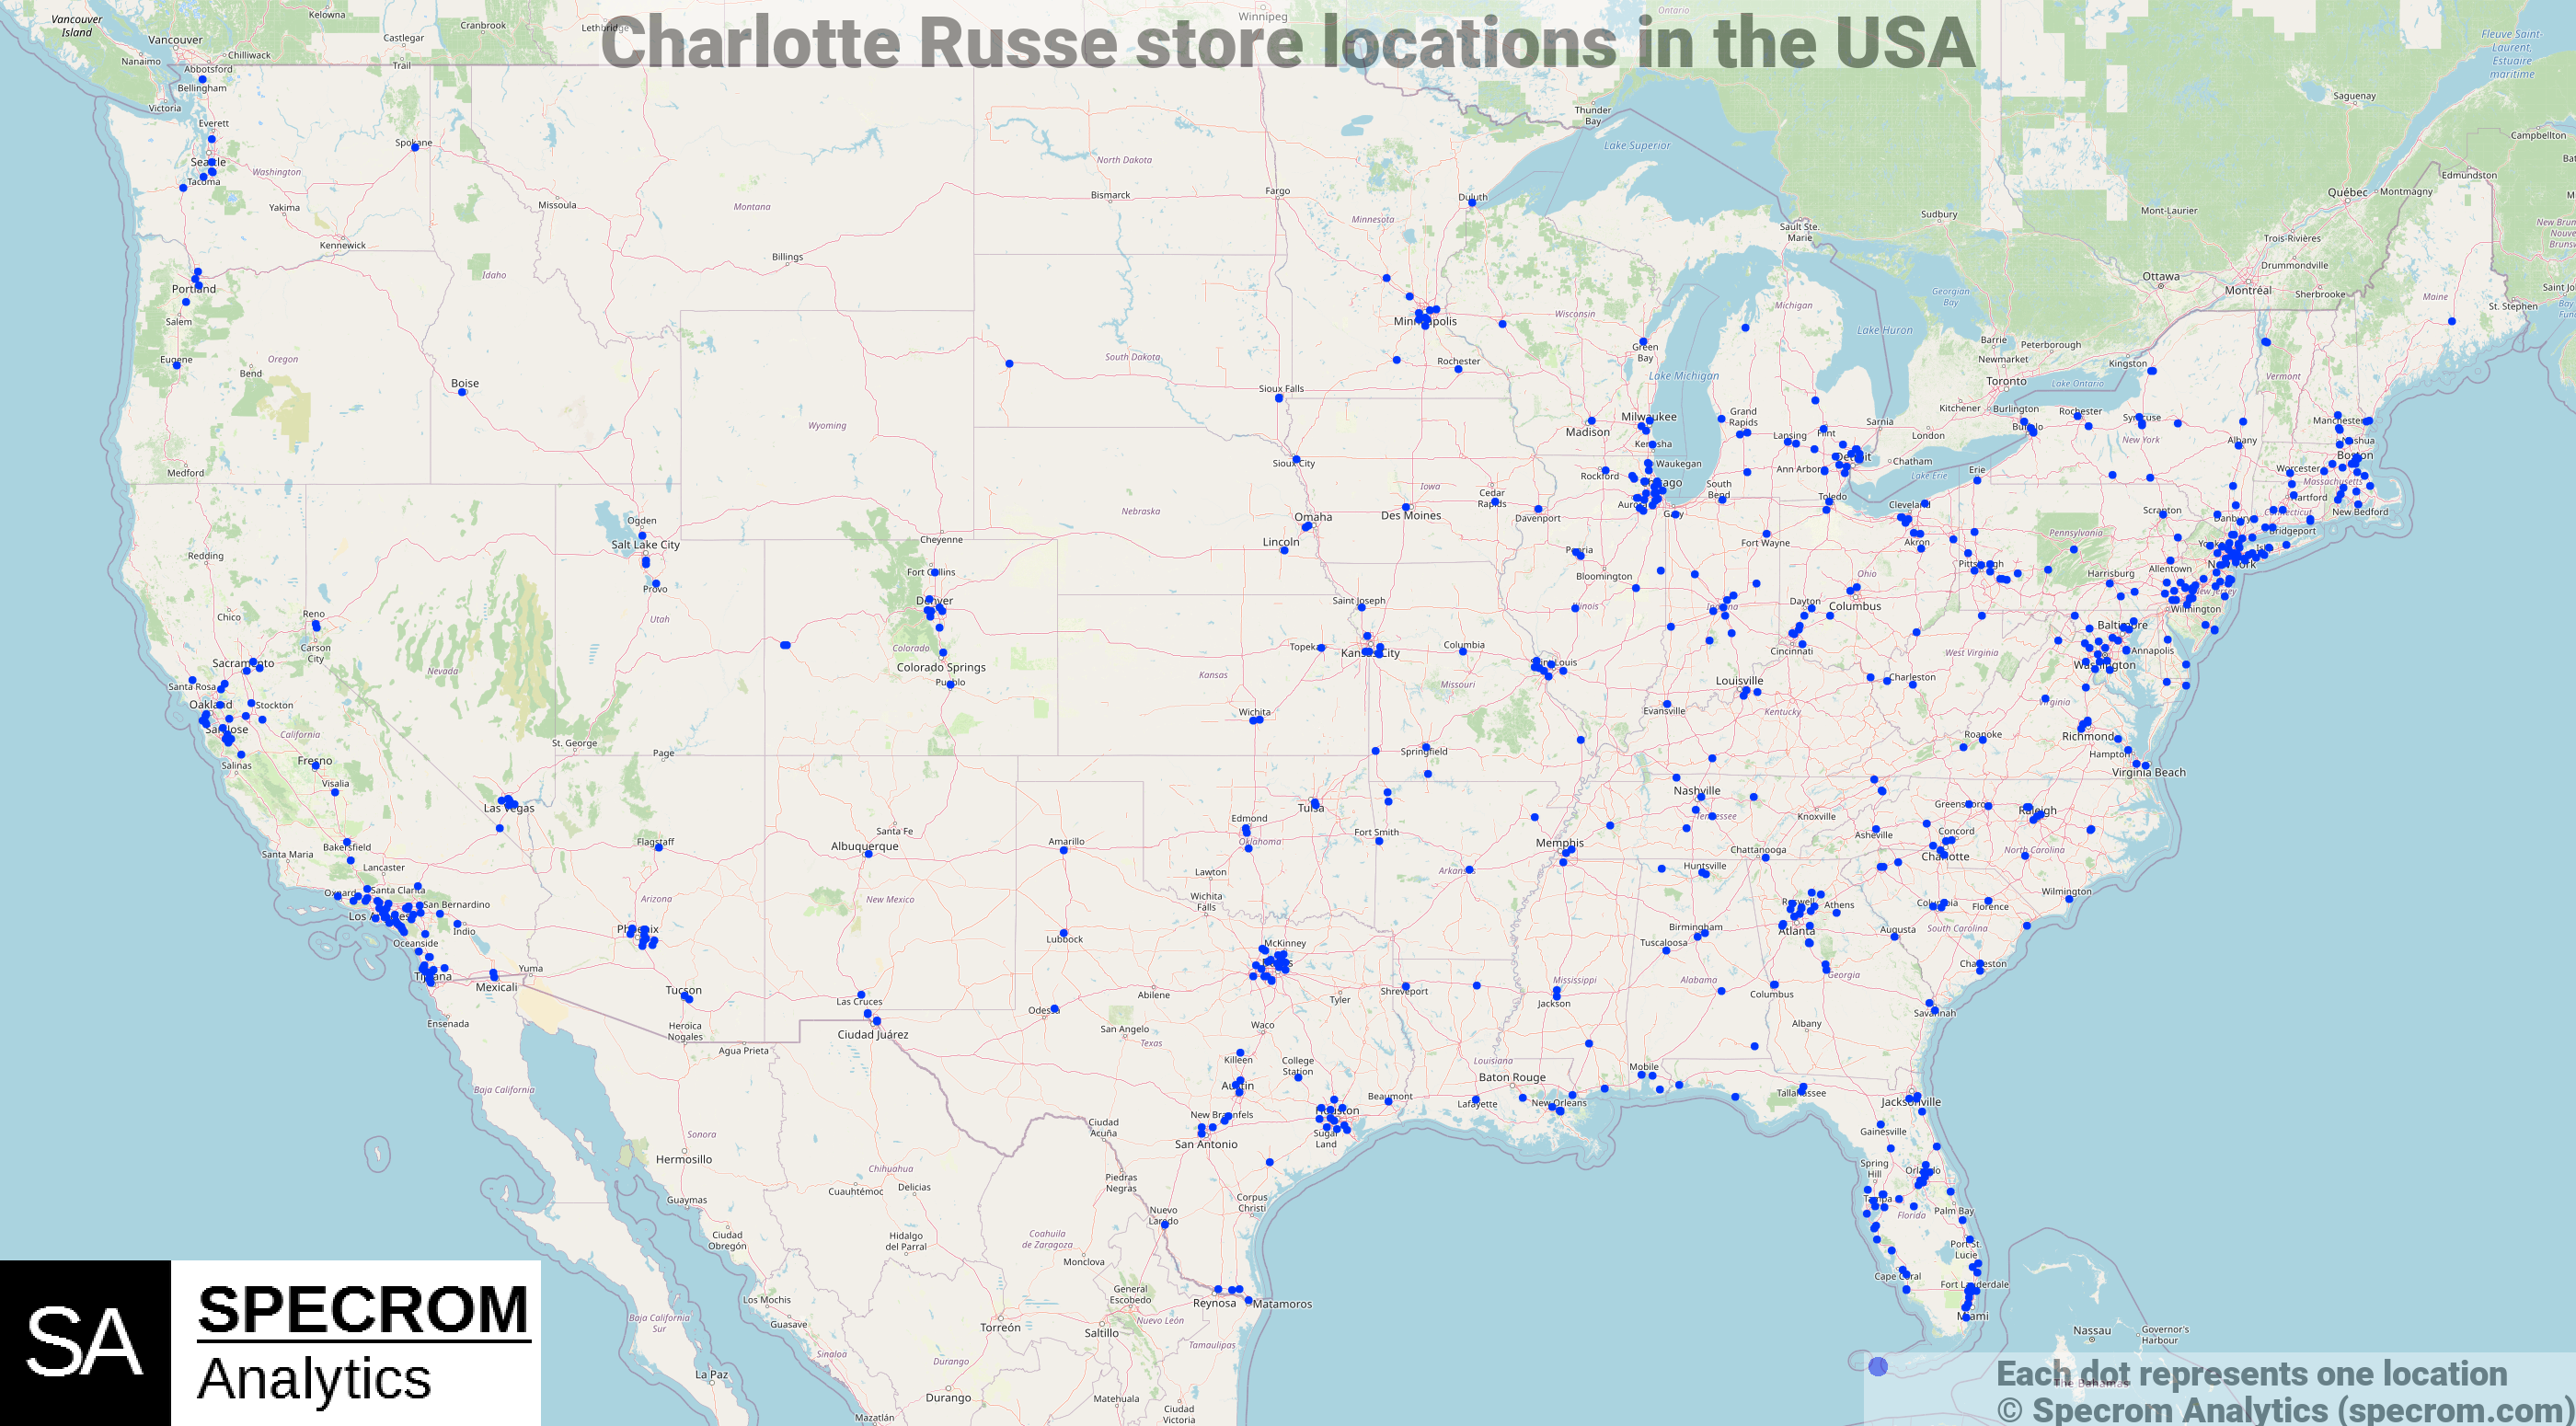 Charlotte Russe store locations in the USA